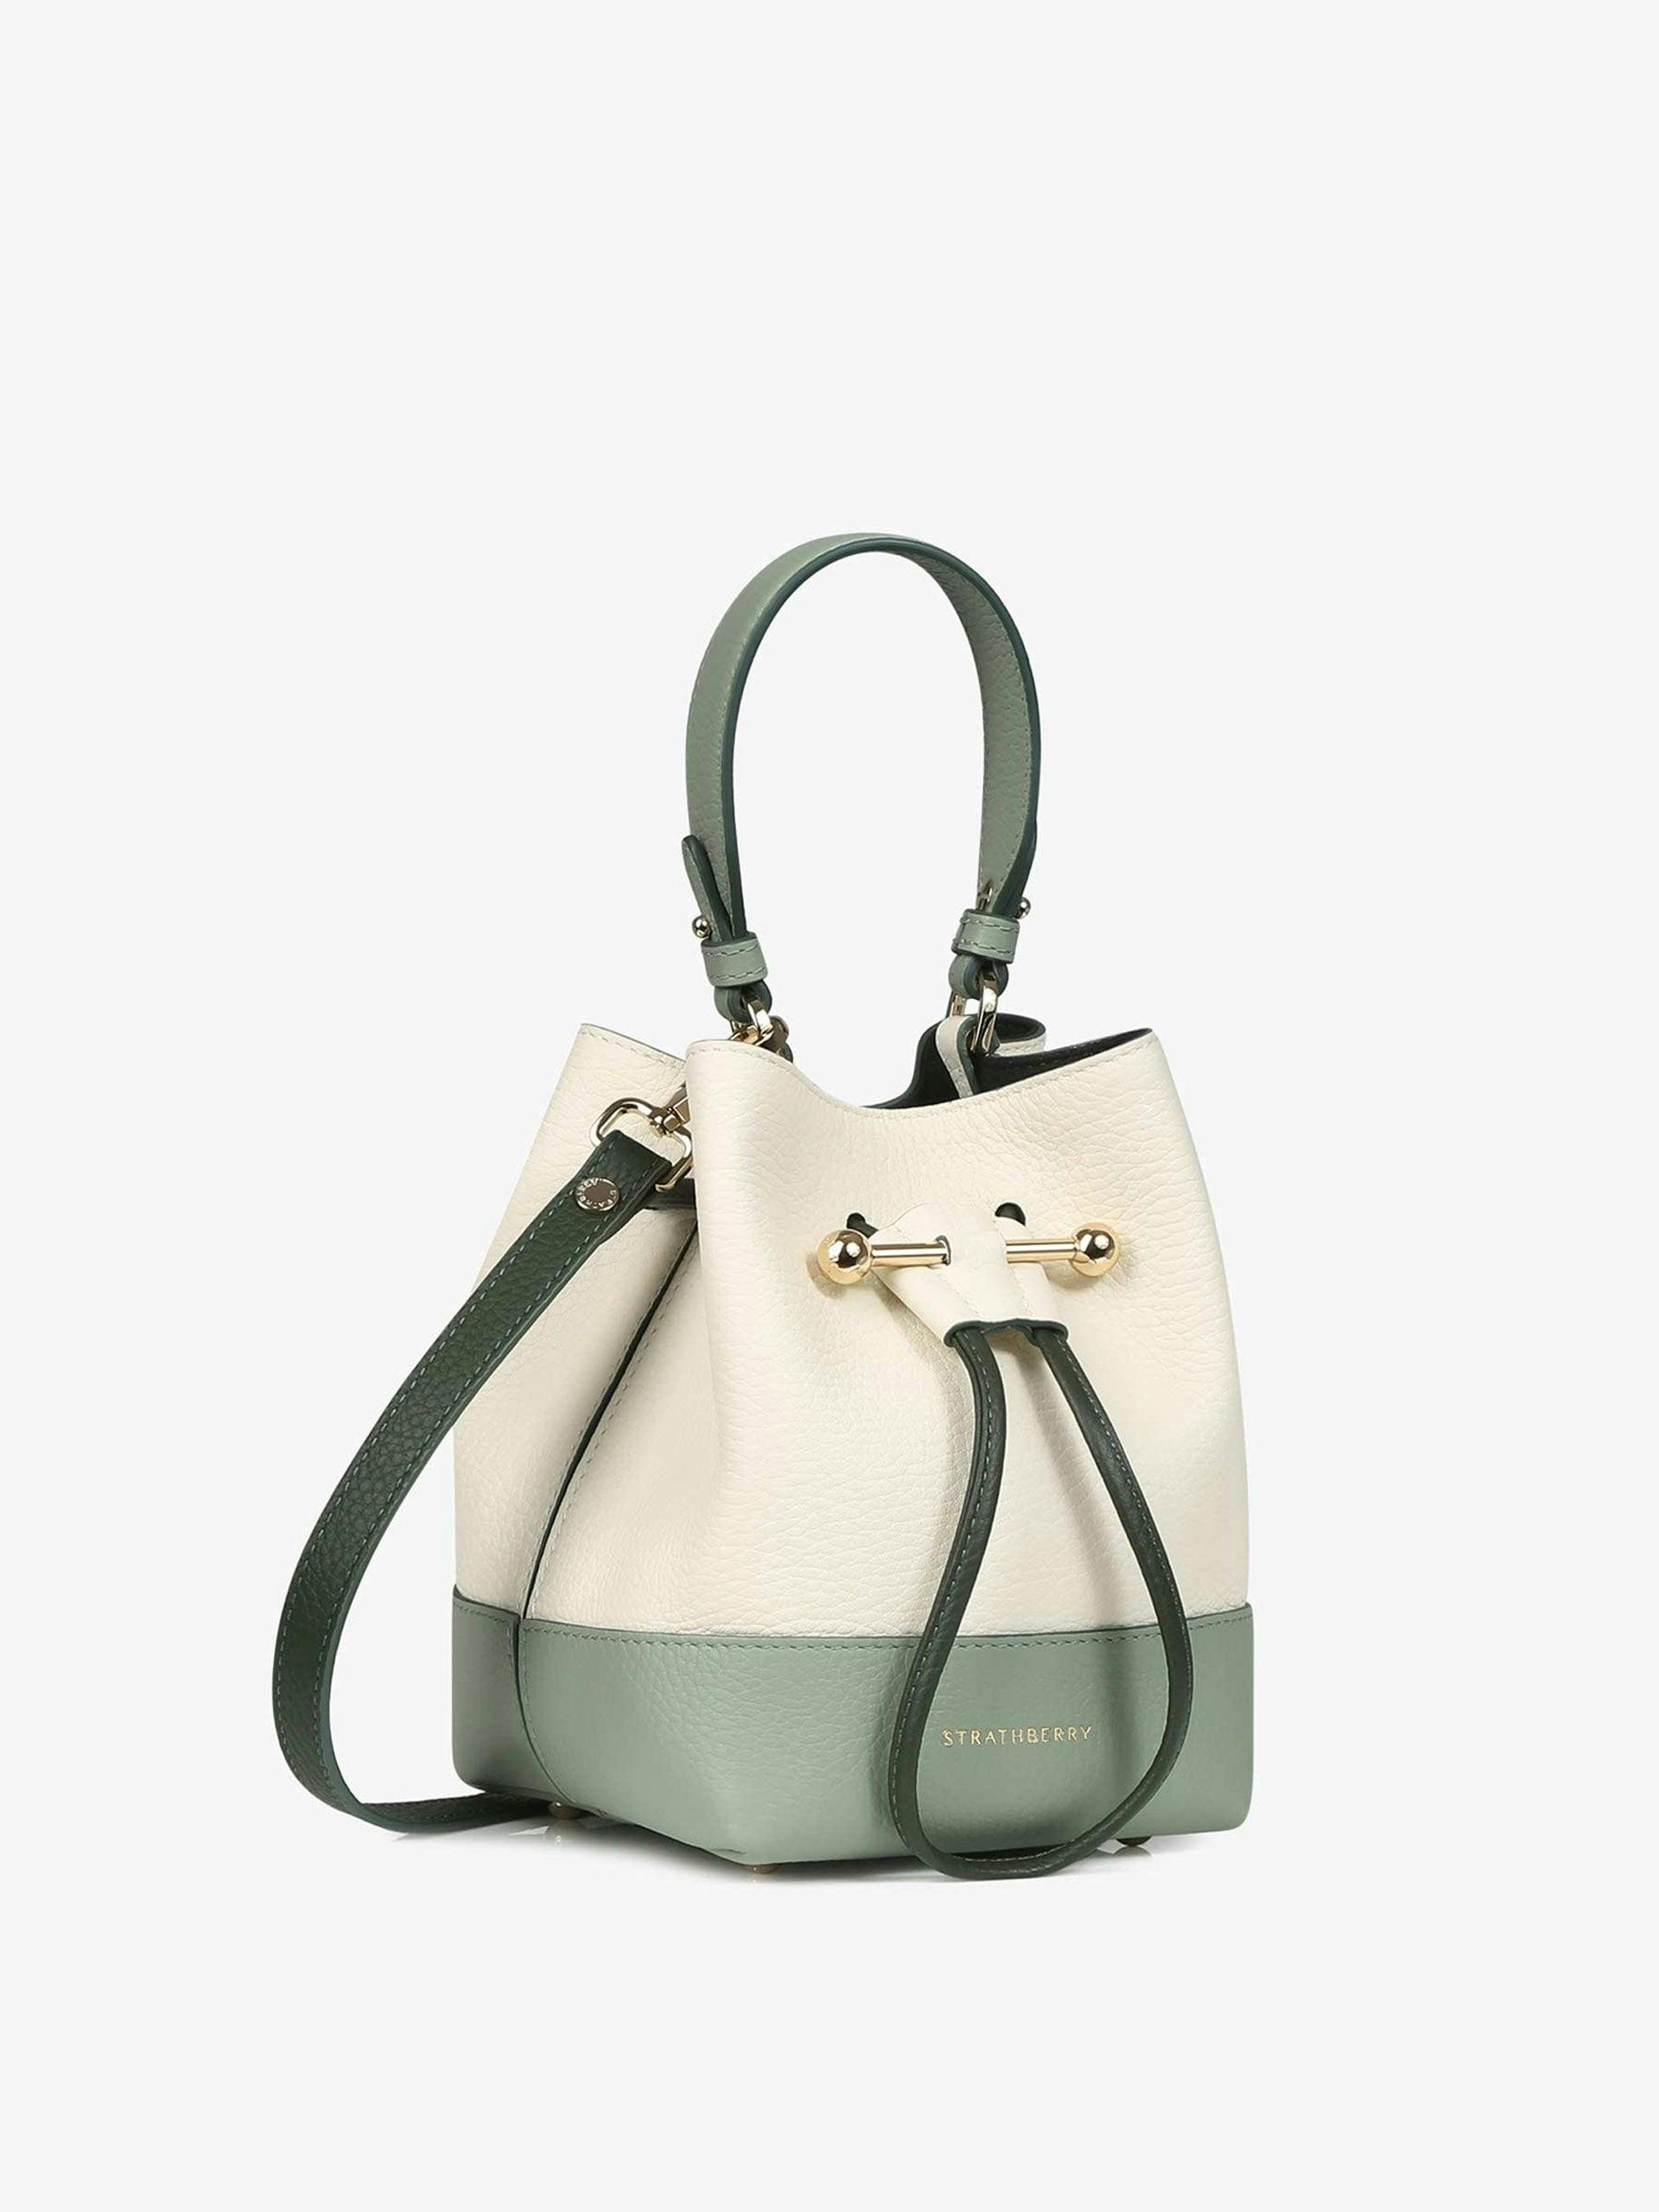 White and green Lana Osette top handle bag